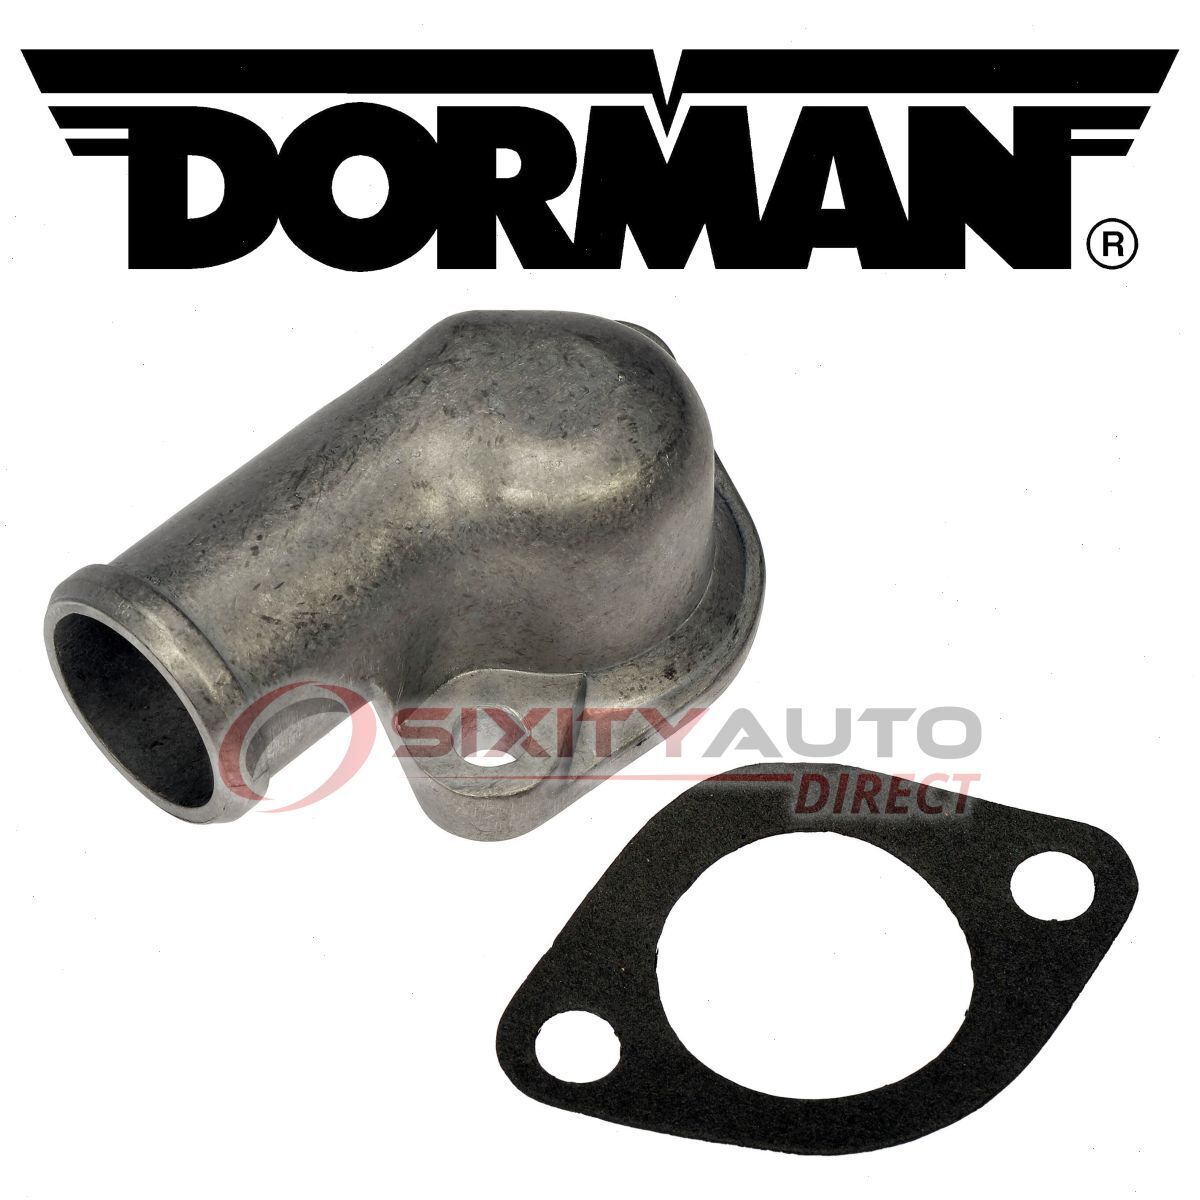 Dorman Engine Coolant Thermostat Housing for 1978-1983 Plymouth Caravelle cq